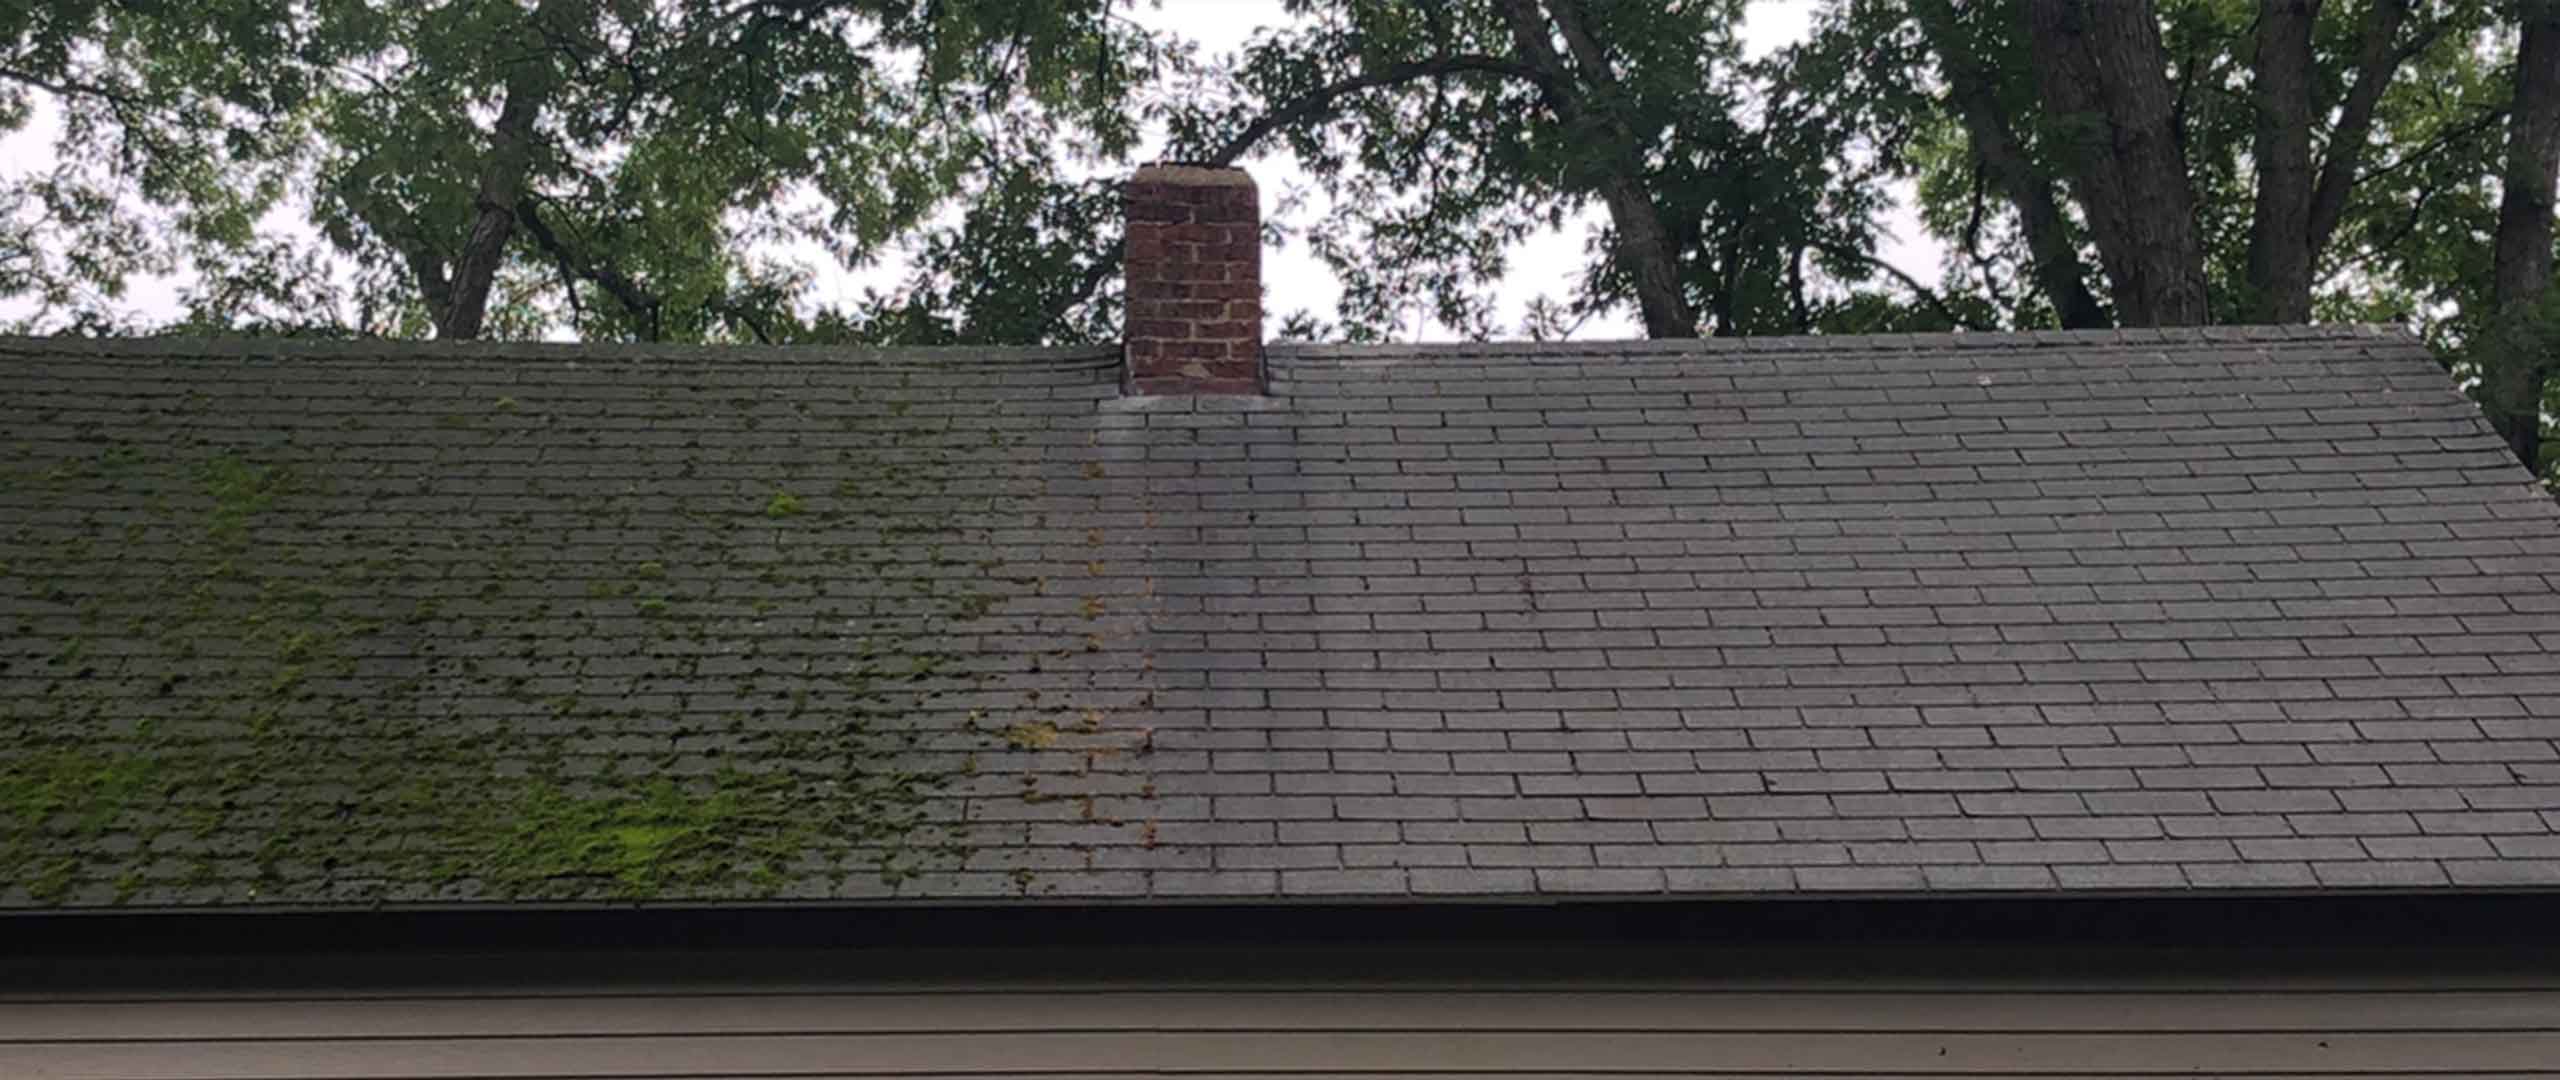 before-and-after-roof-washing-service-grand-rapids-mi-mitten-exteriors